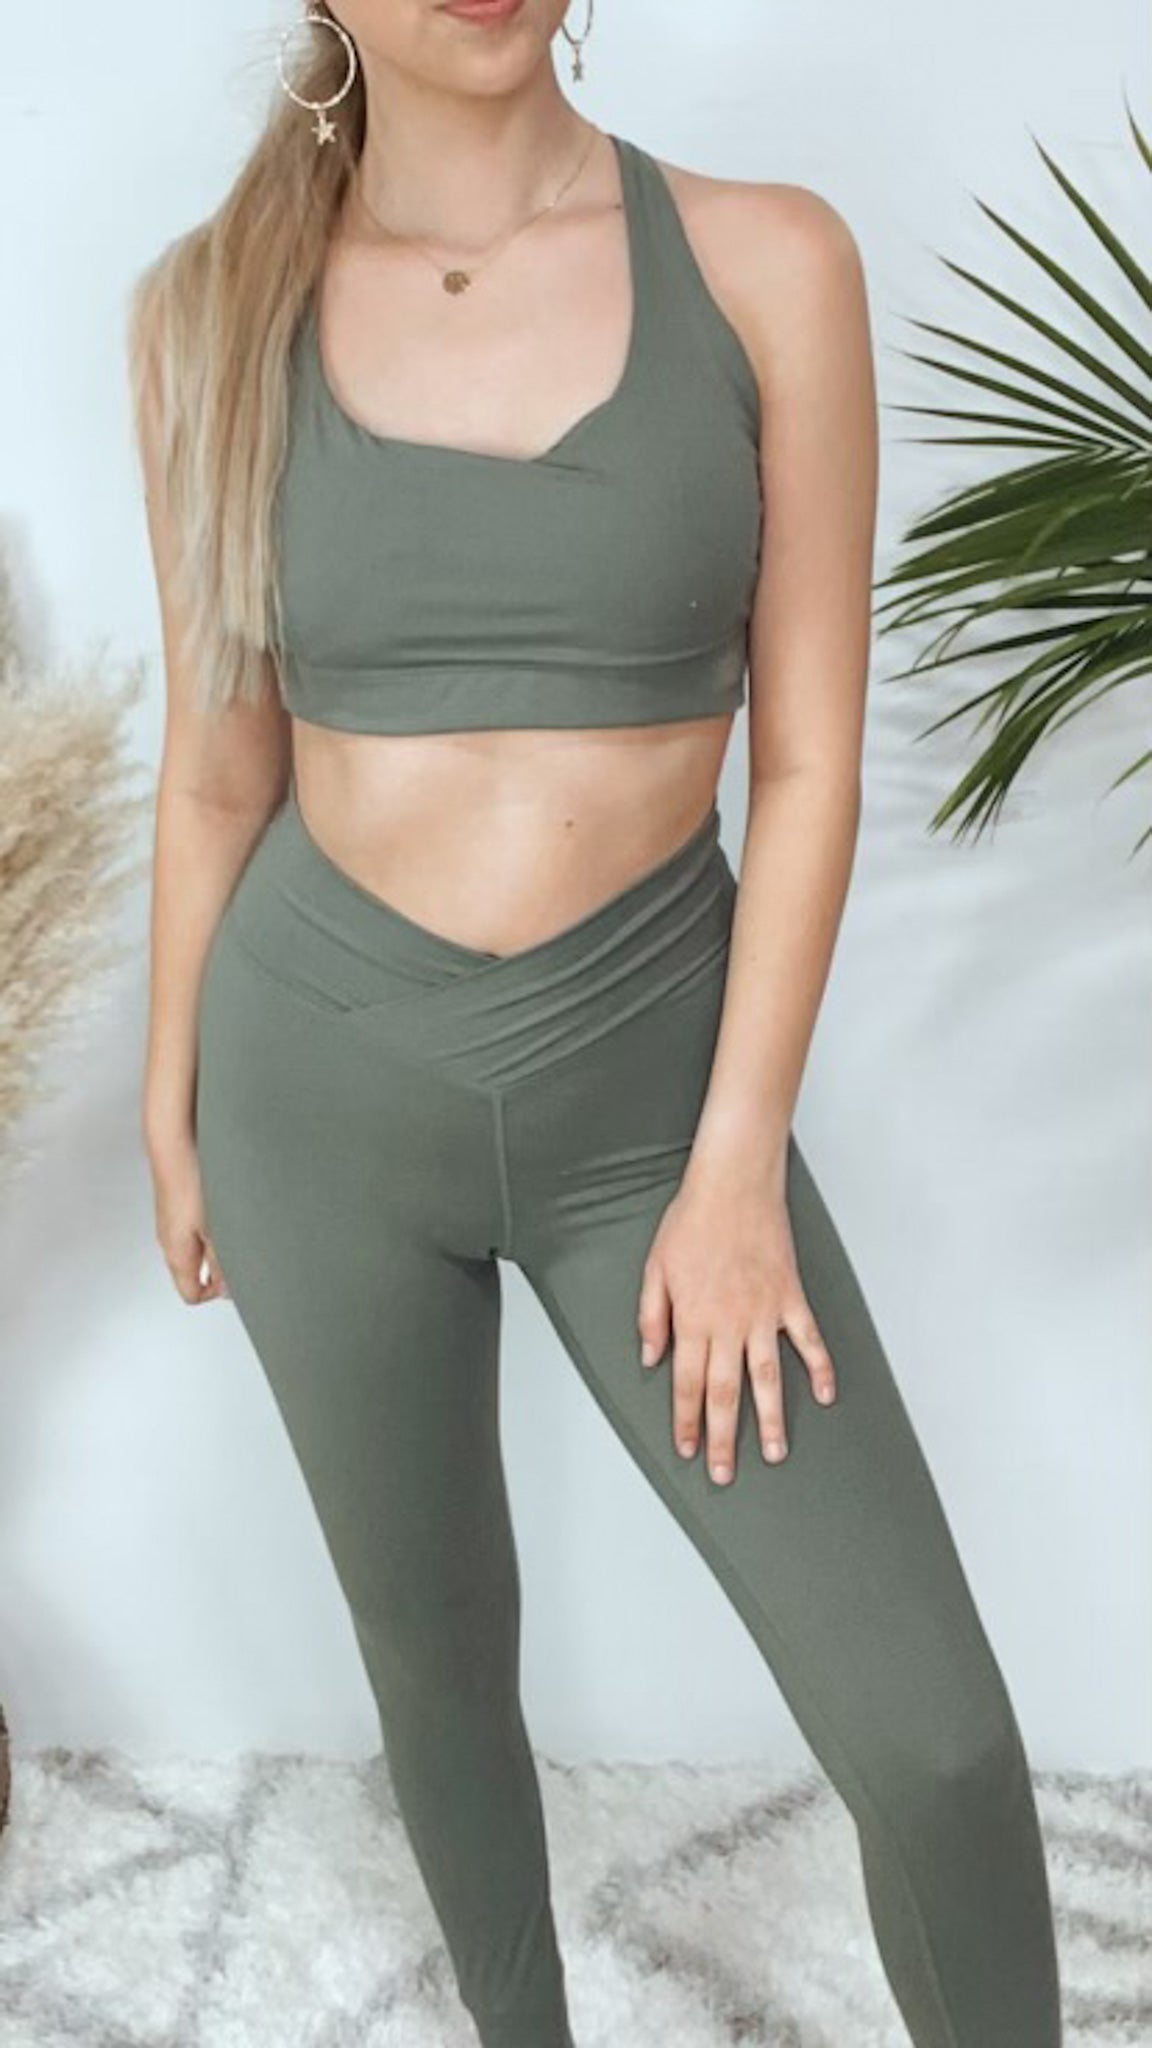 BEST Leggings With Crossover Waist in Sage Grey